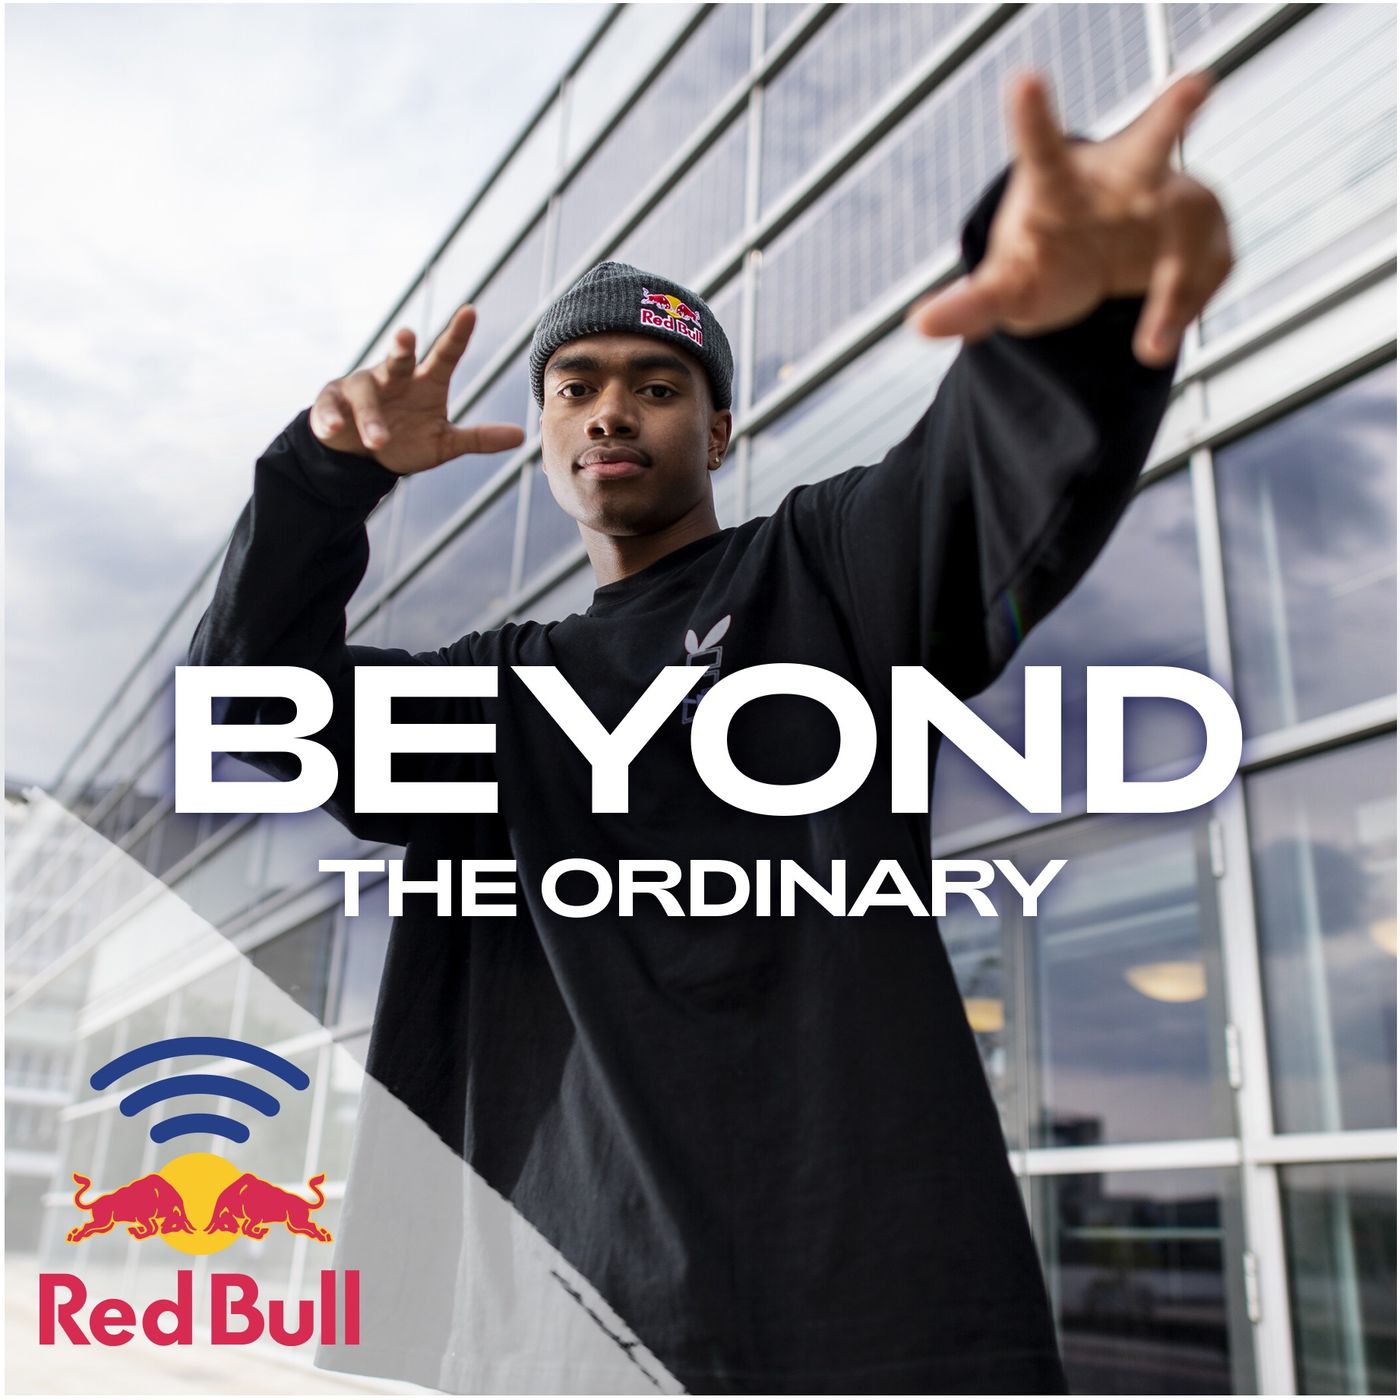 Meet the Red Bull BC One All Star who’s aiming for the top with his unique break style: B-Boy Lee